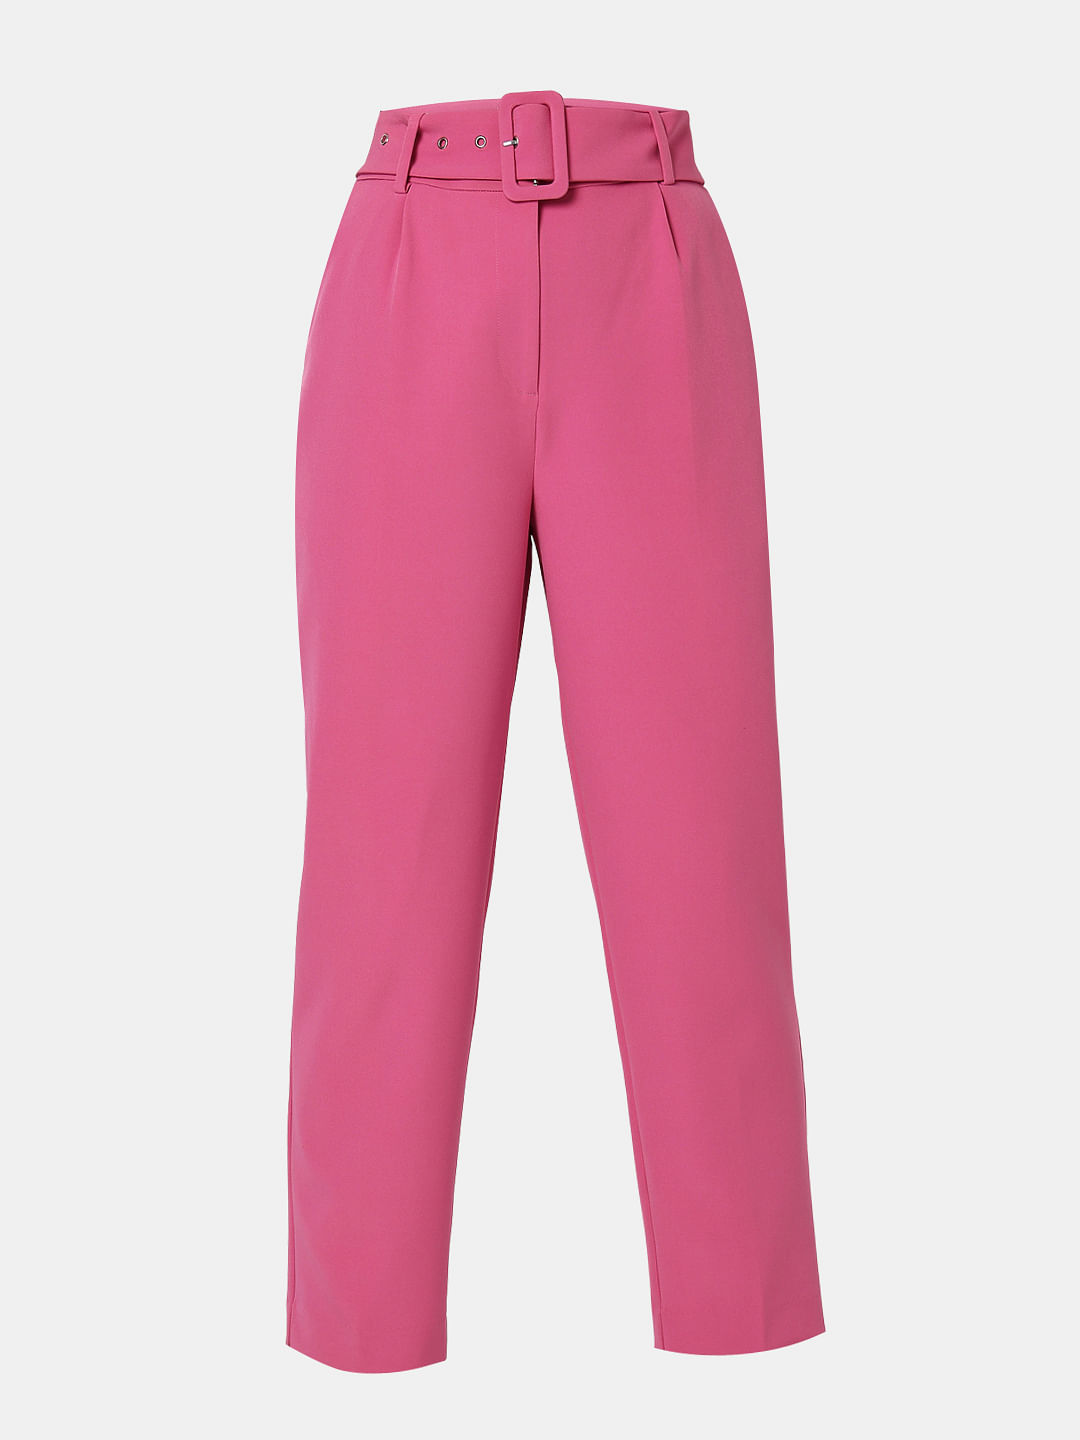 Buy Pink Trousers & Pants for Women by Enchanted Drapes Online | Ajio.com